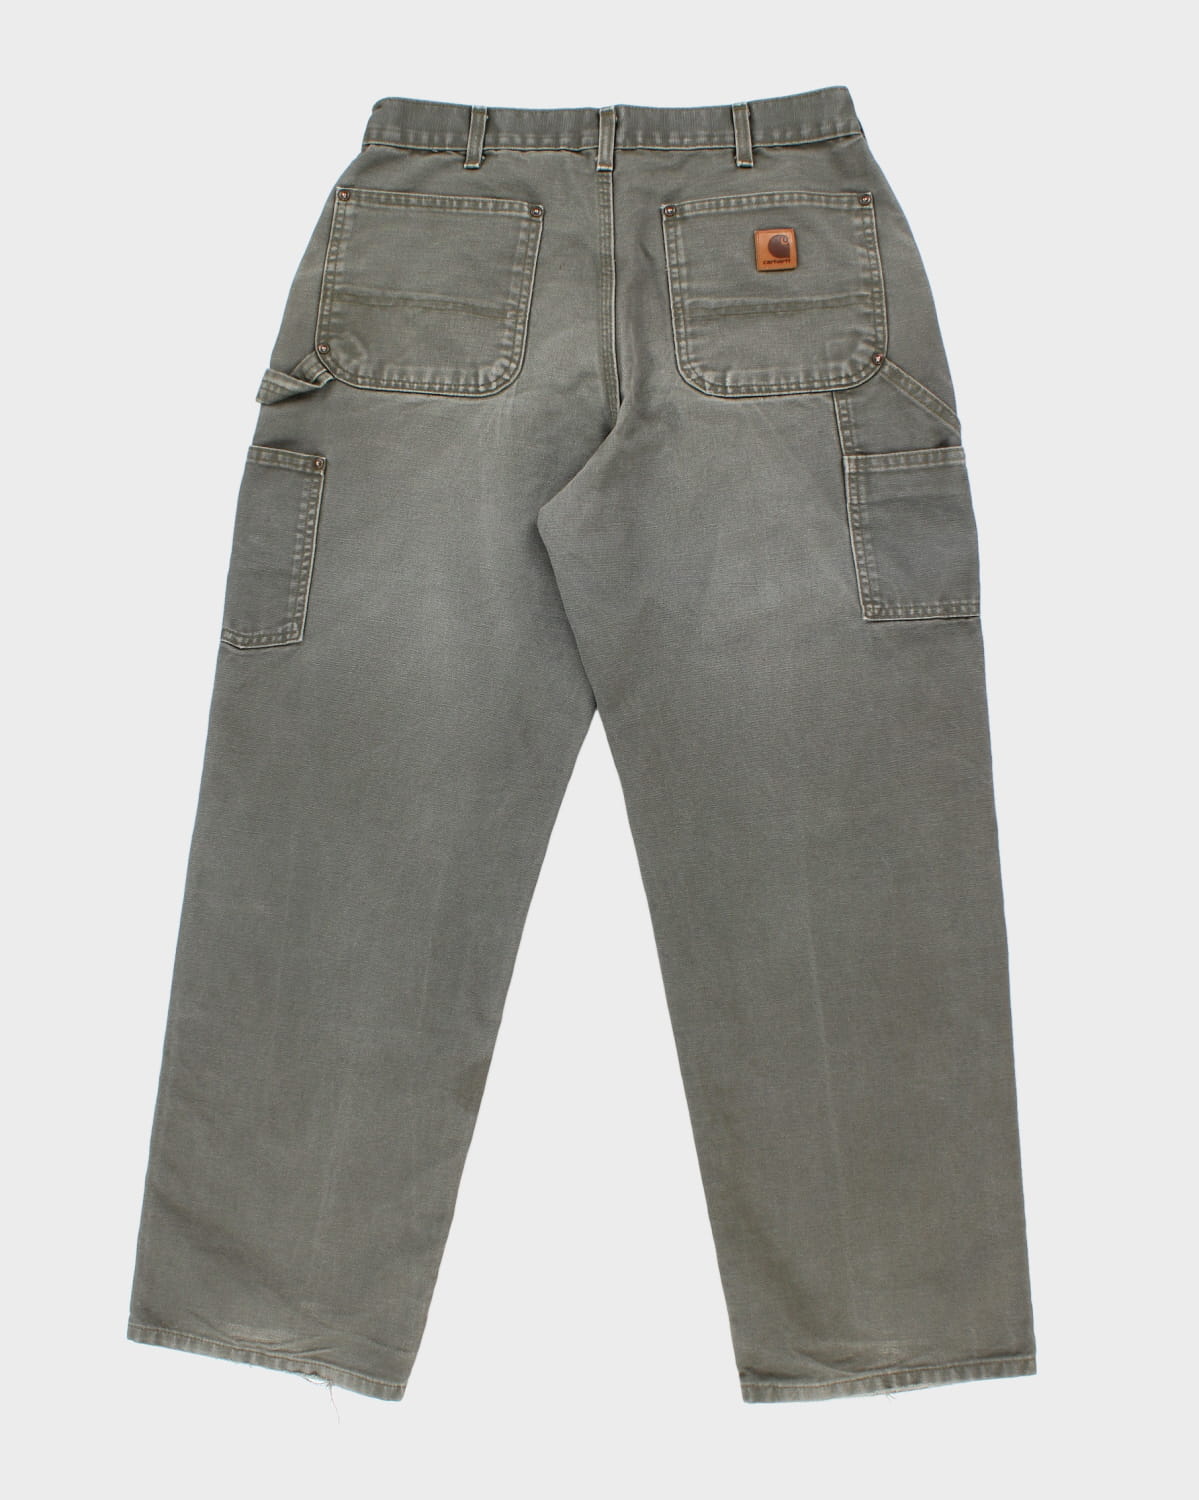 Carhartt Original Dungaree Fit Double Knee Trousers - W34 L32